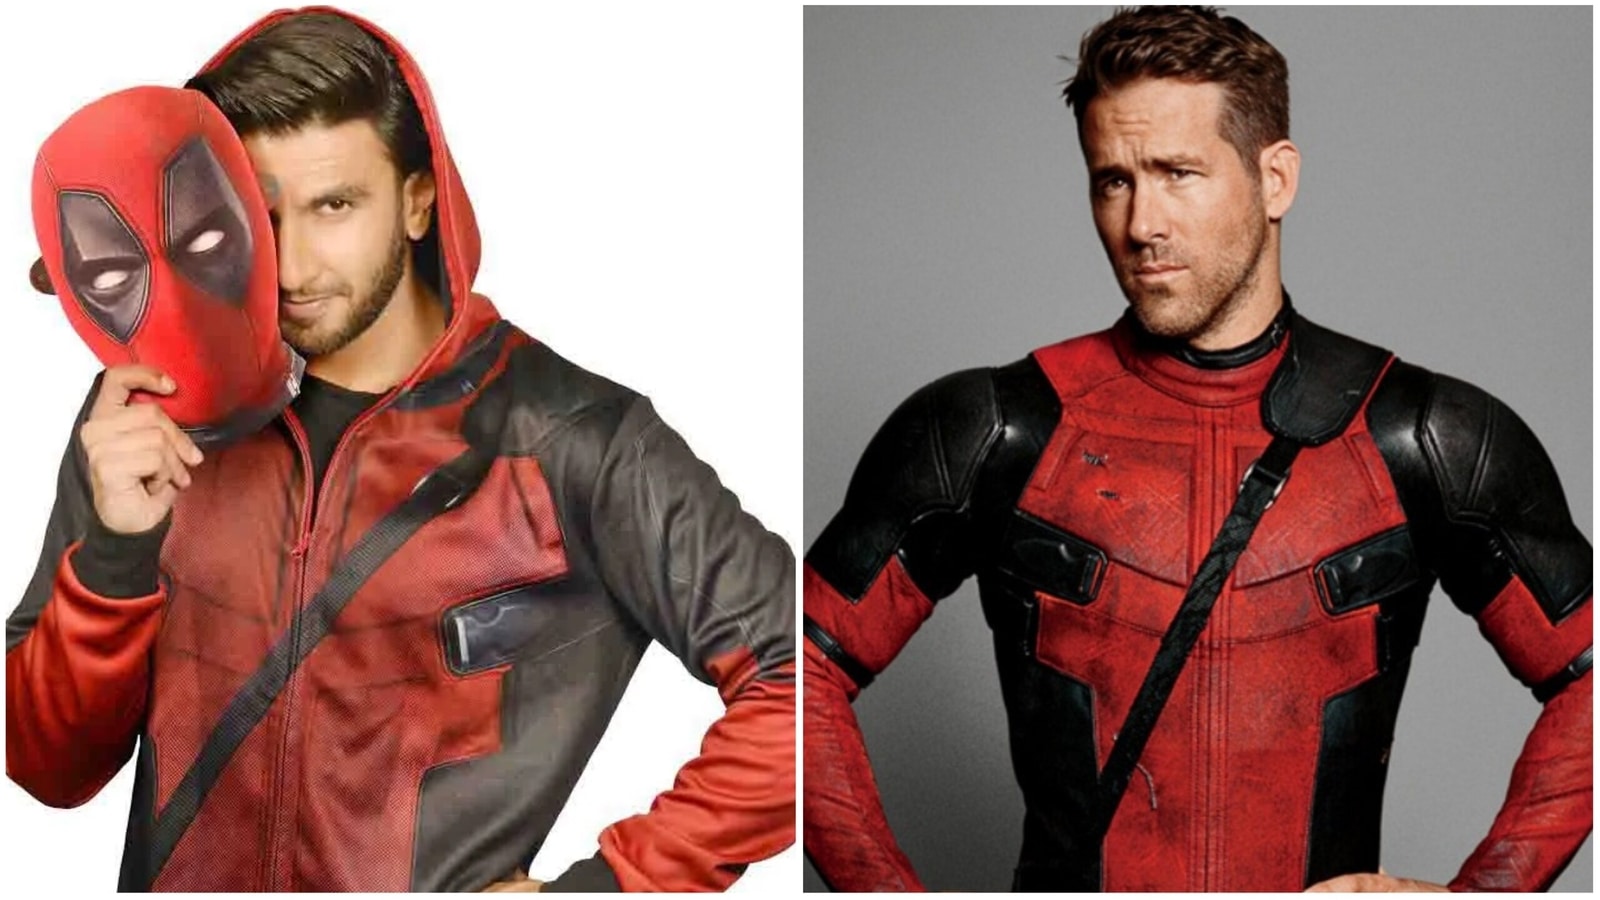 ryan-reynolds-says-he-d-like-to-slide-into-ranveer-singh-s-dms-pretty-sure-everyone-in-india-wants-to-do-it-too